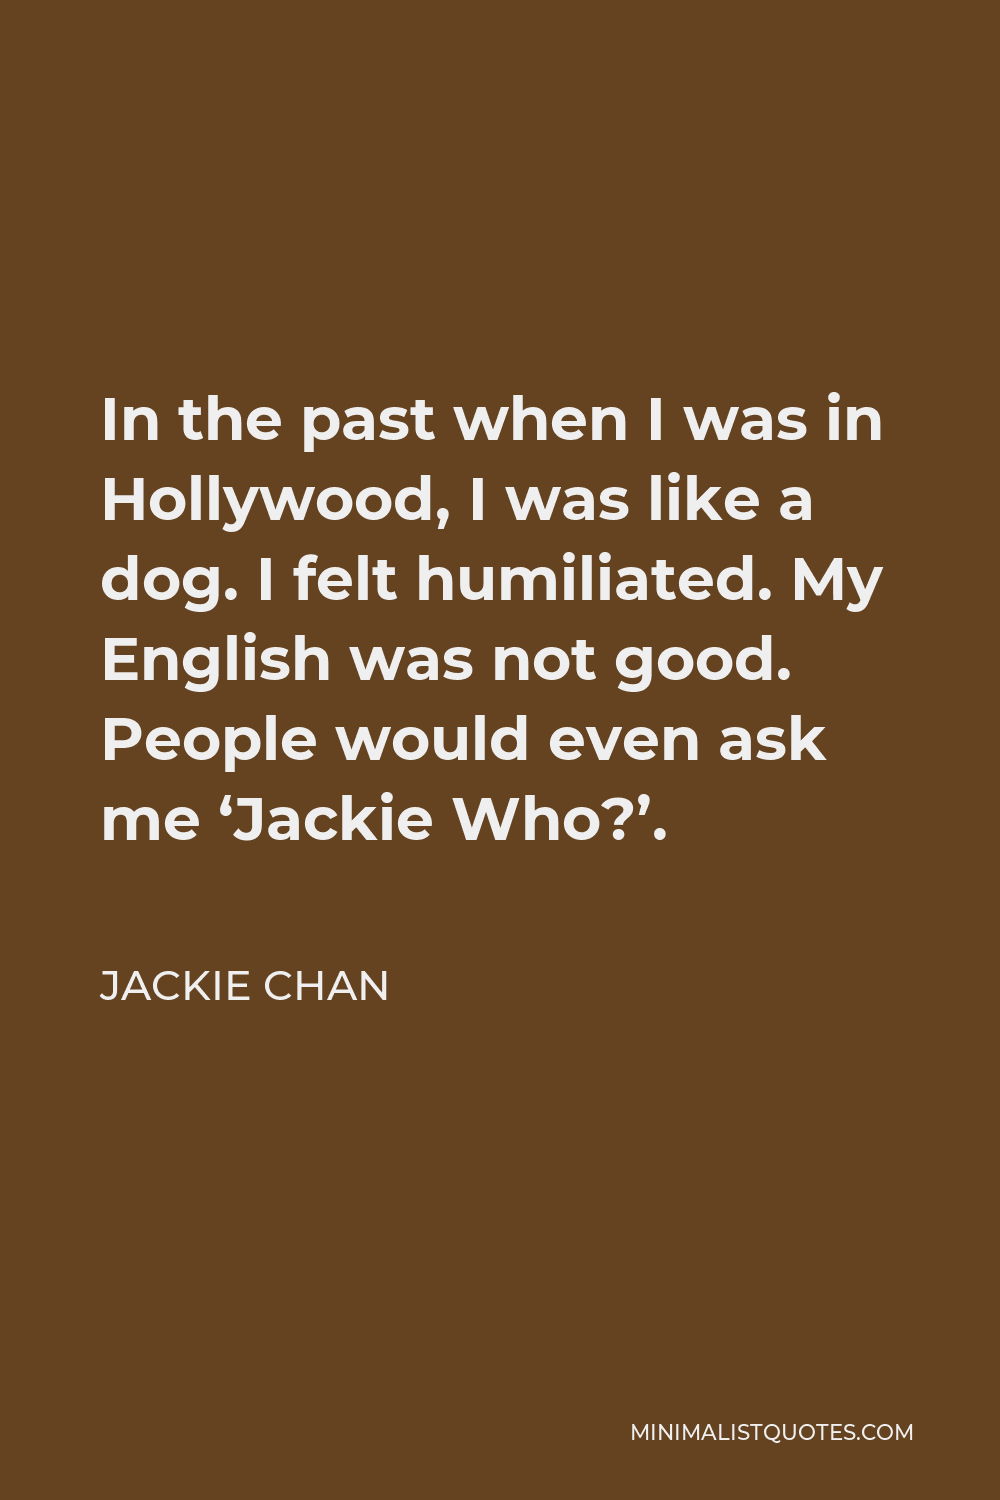 Jackie Chan Quote - In the past when I was in Hollywood, I was like a dog. I felt humiliated. My English was not good. People would even ask me ‘Jackie Who?’.